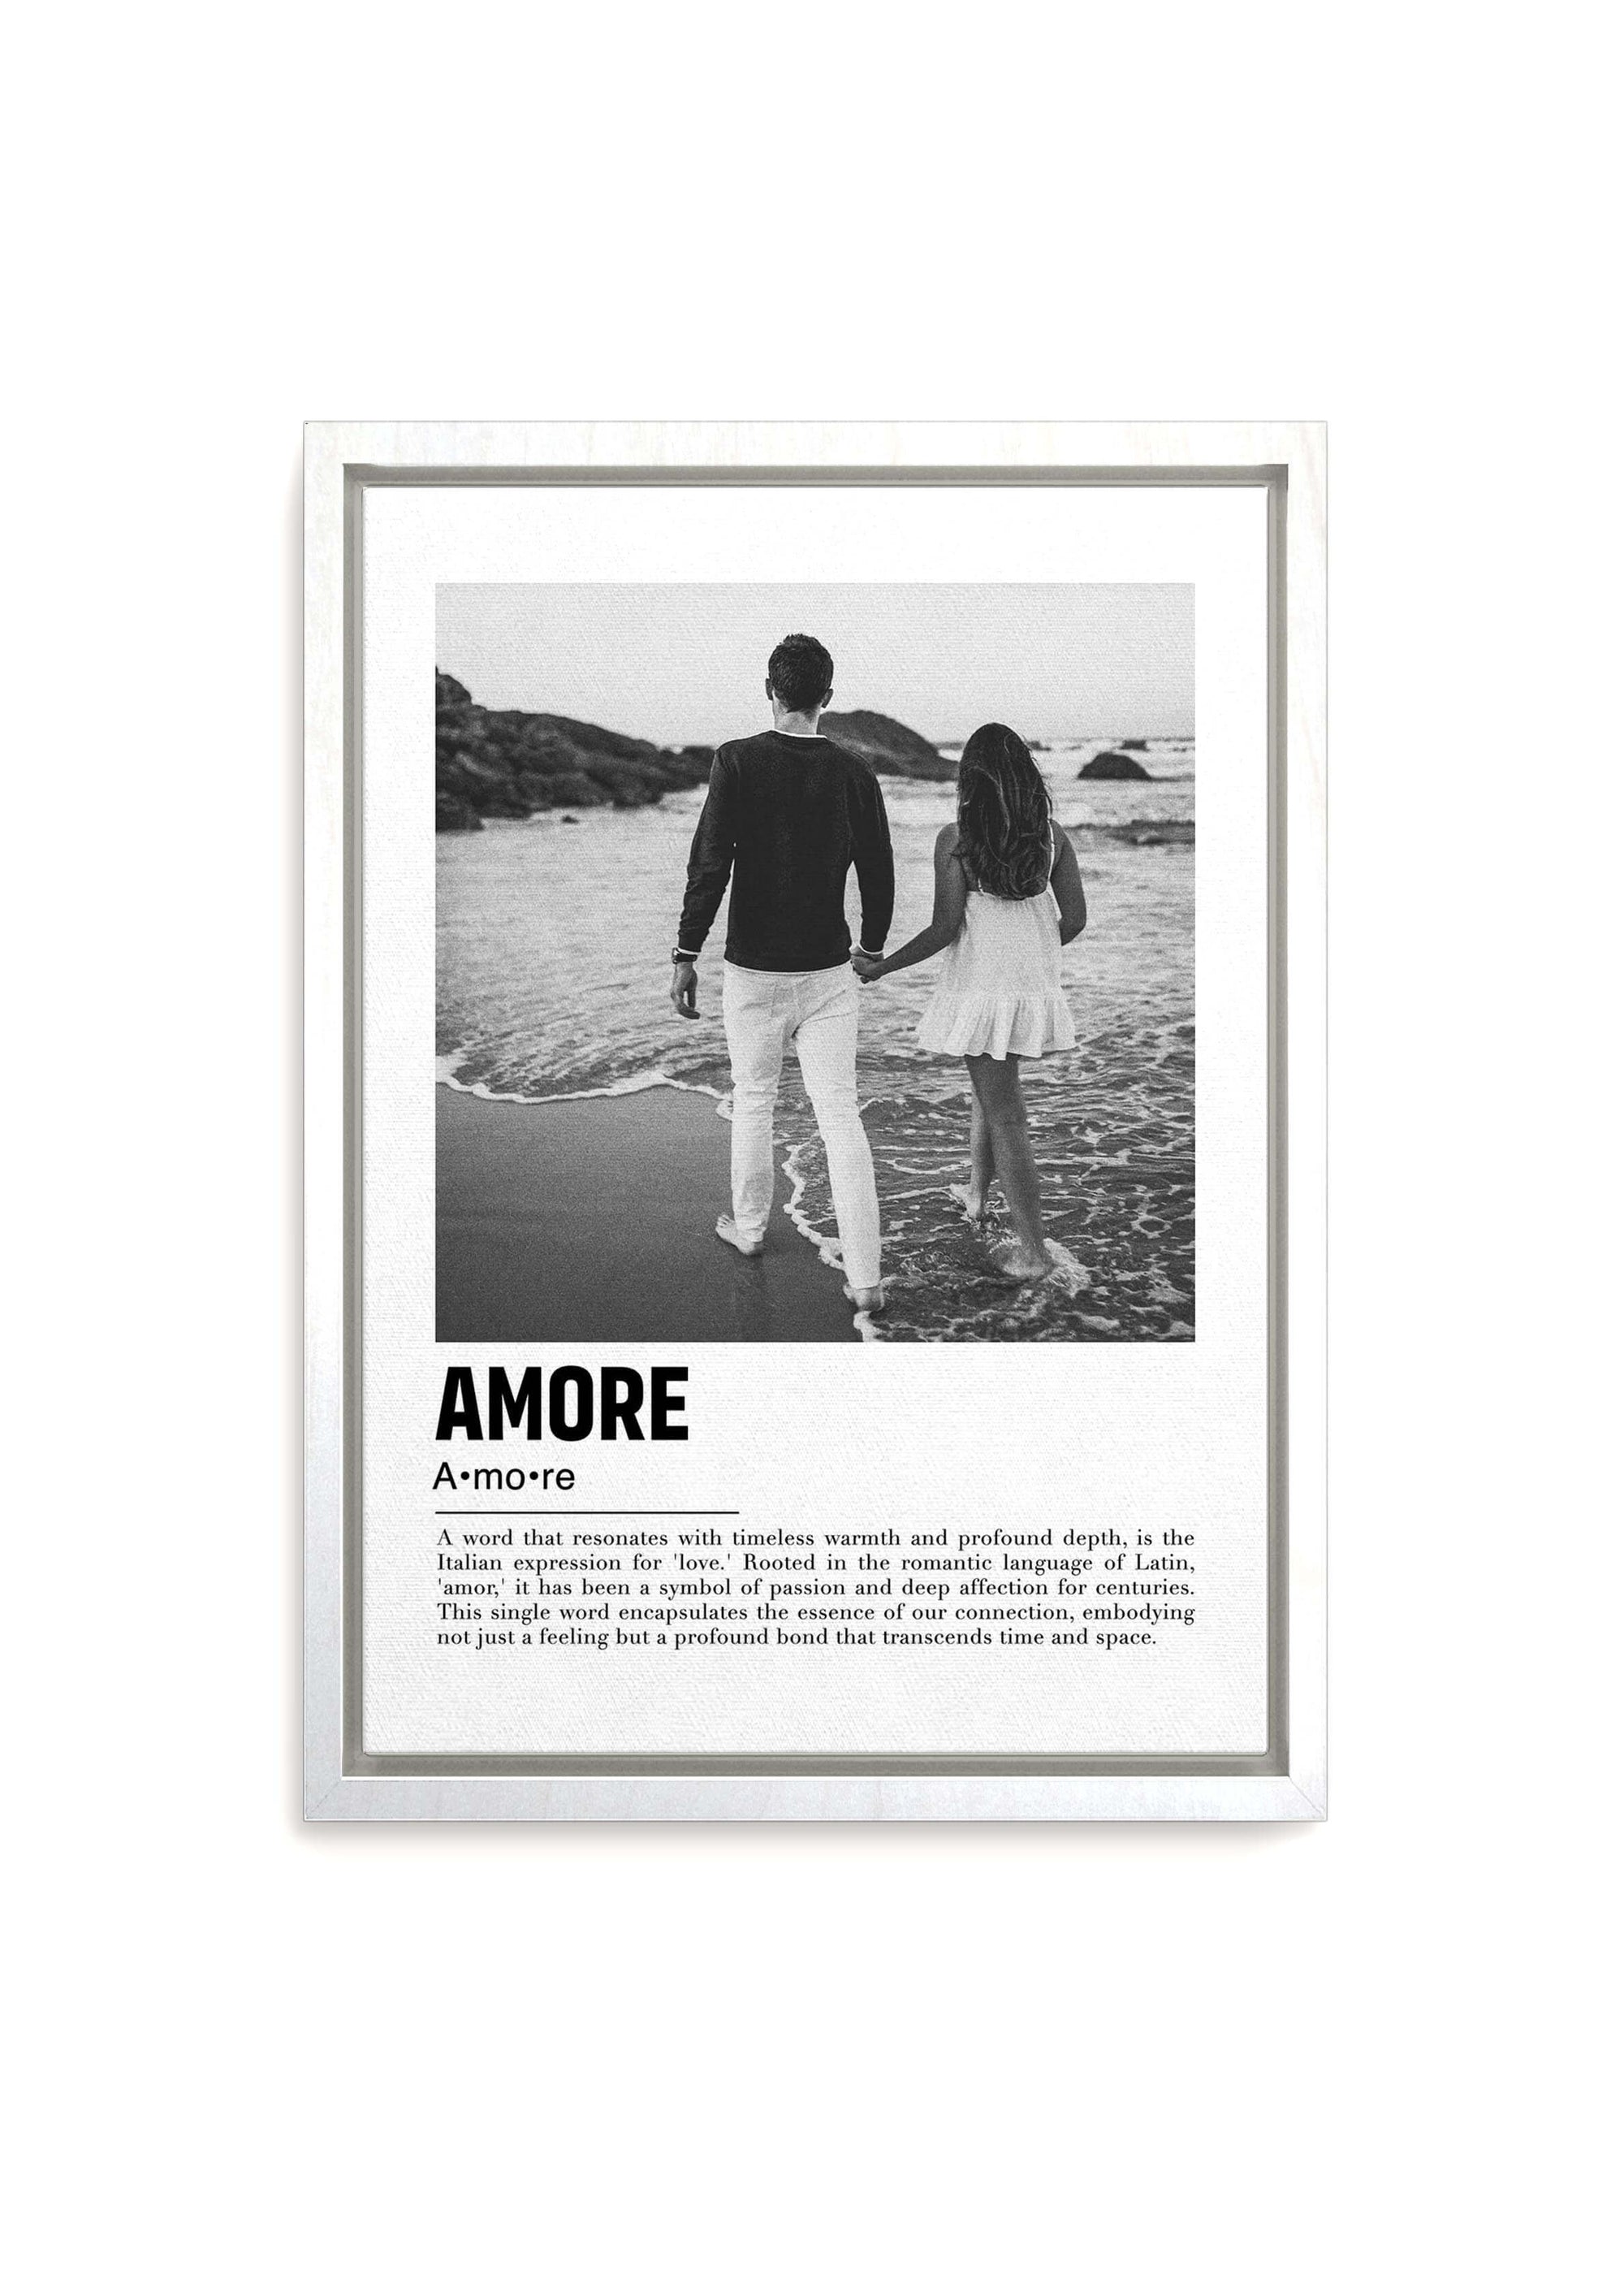 Anniversary gift of a personalized photo of a couple walking on a beach in black and white with a custom message on white framed canvas on a white background.